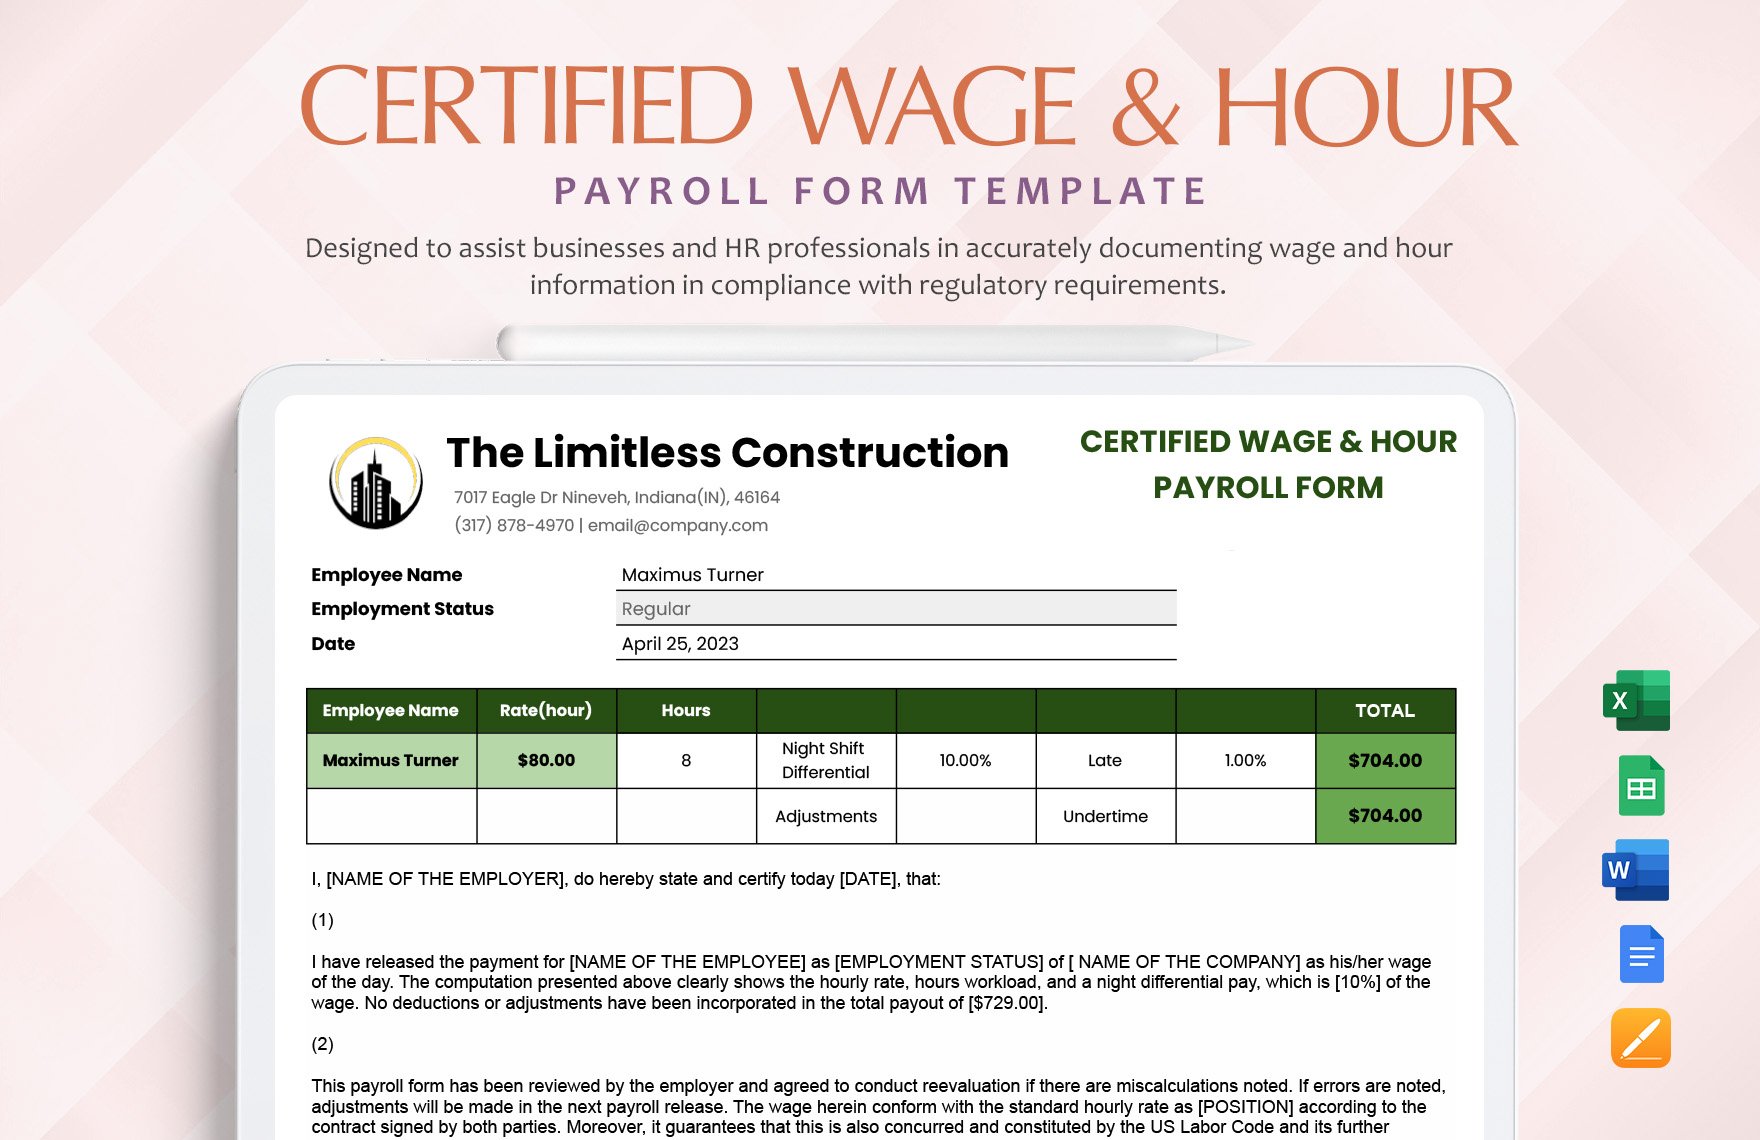 Certified Wage & Hour Payroll Form Template in Word, Google Docs, Excel, Google Sheets, Apple Pages